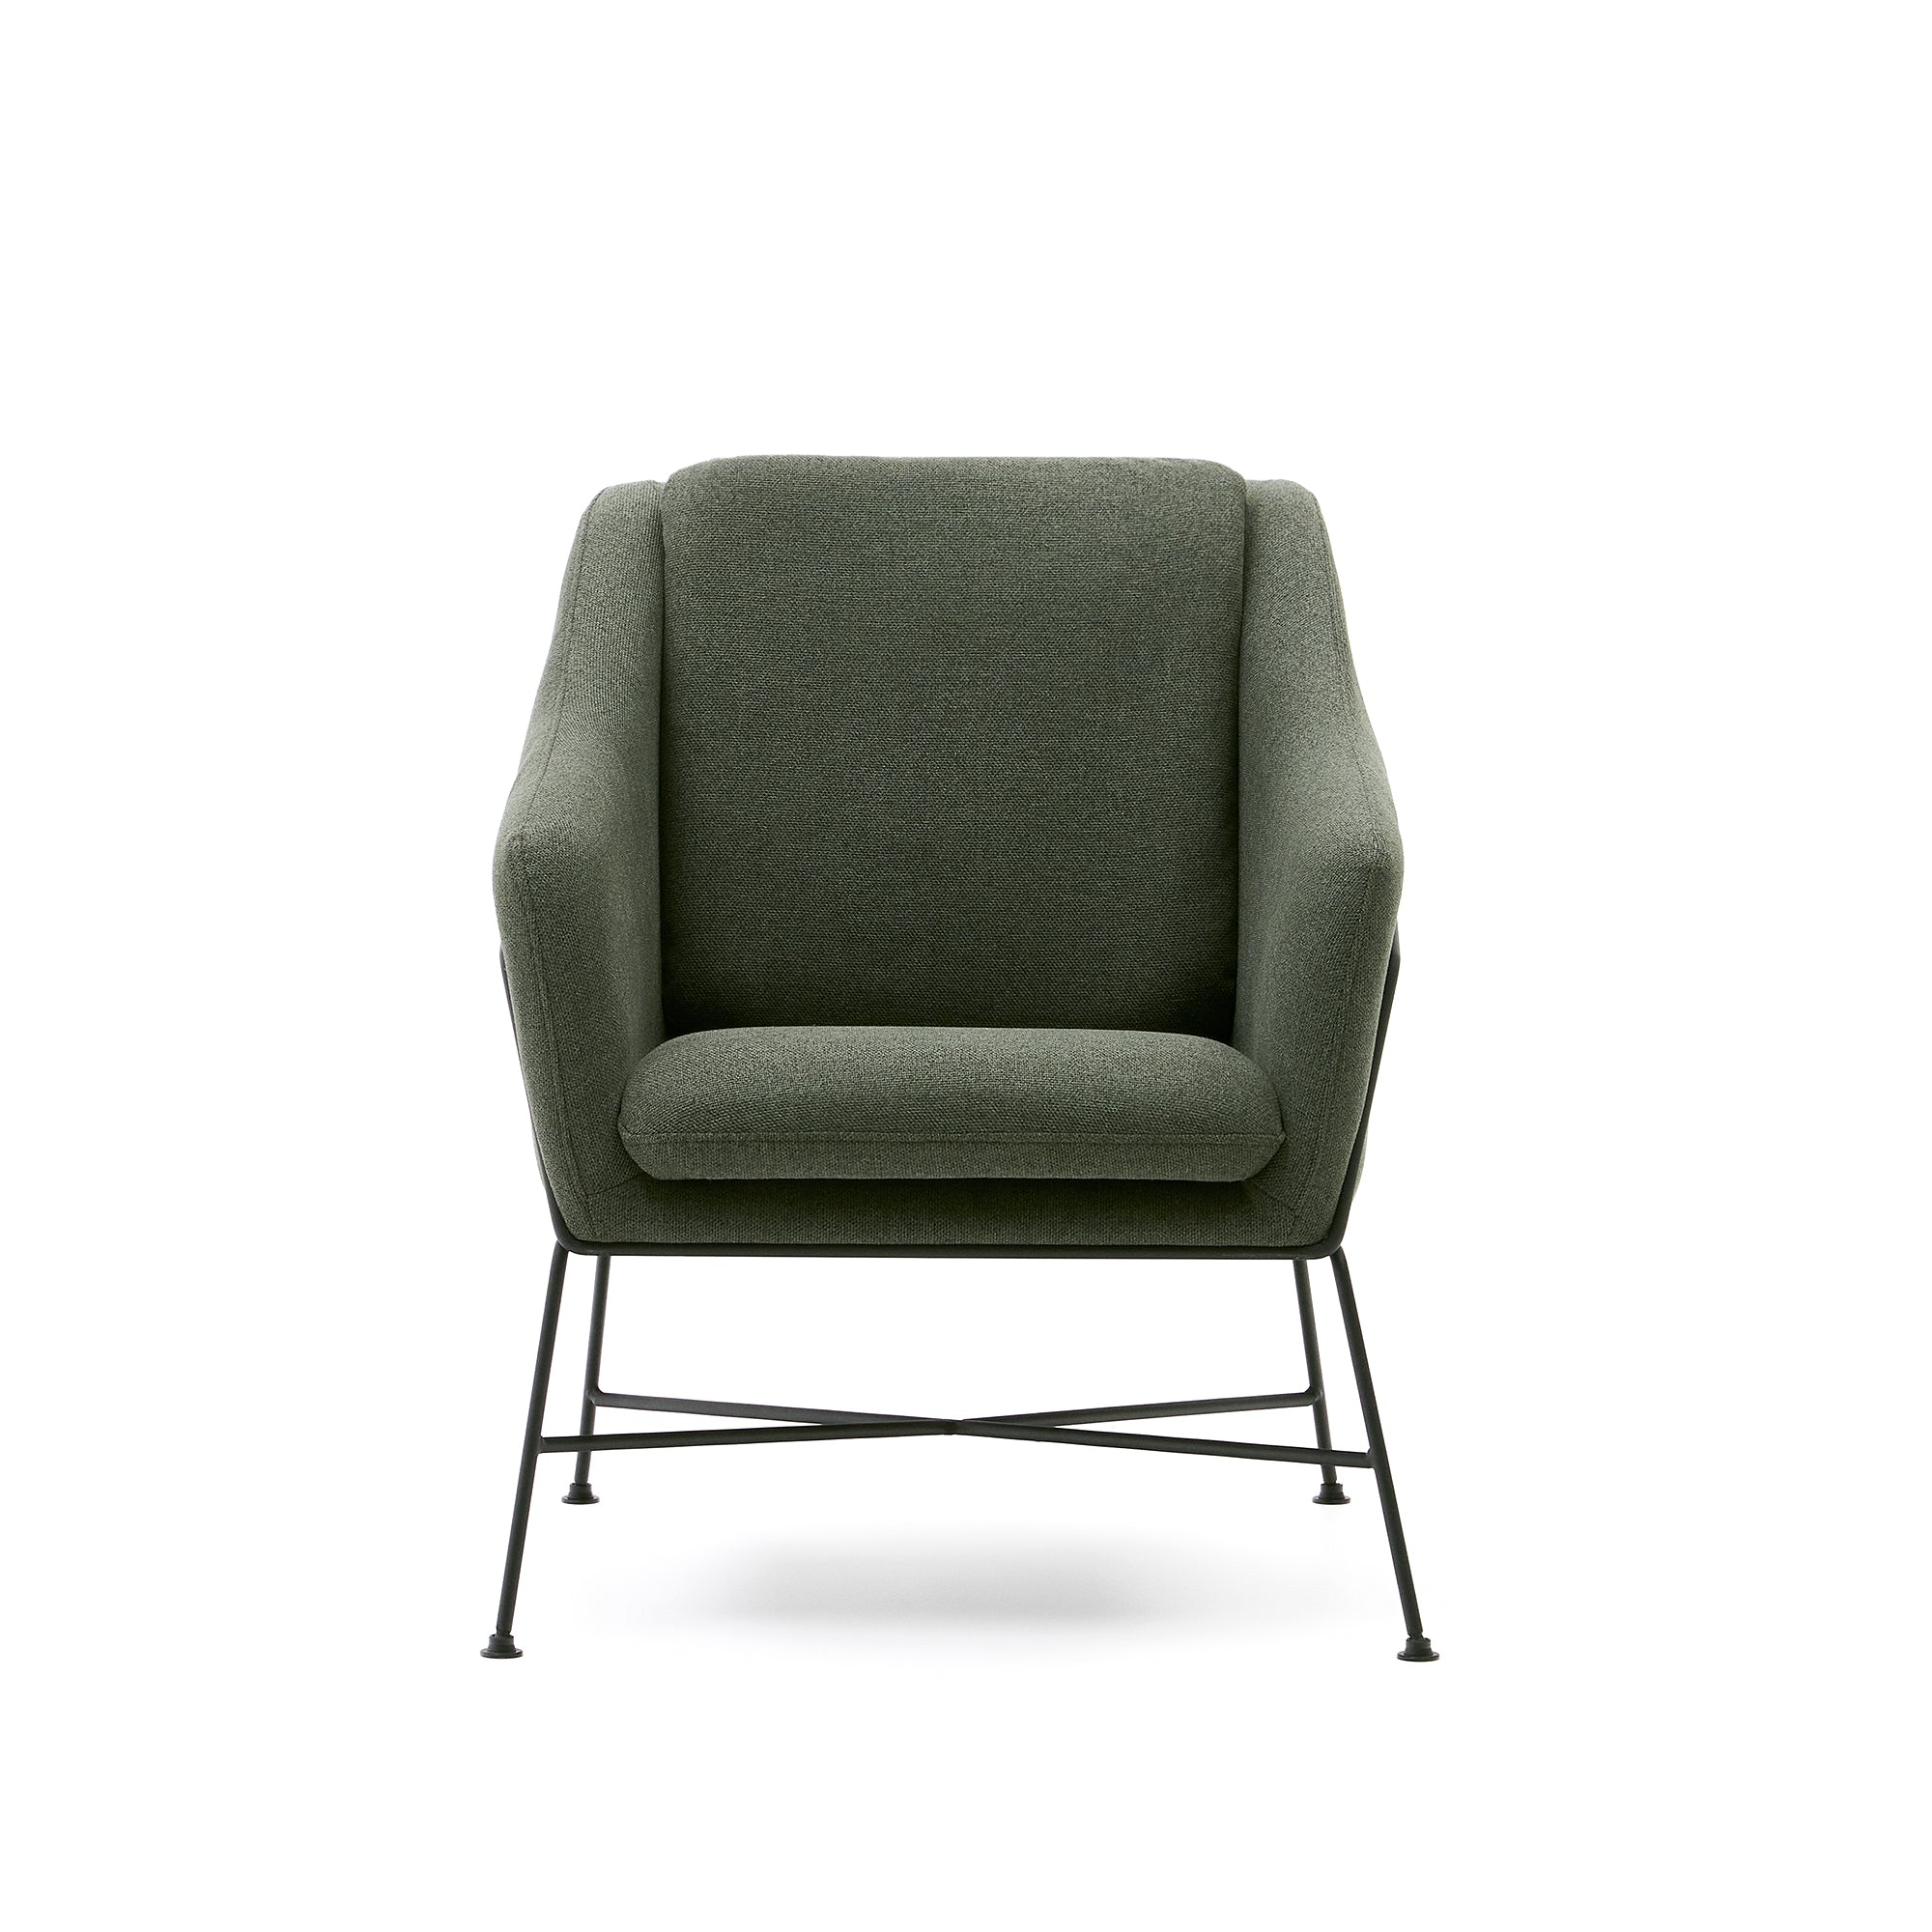 Brida armchair in green and steel legs with black finish 